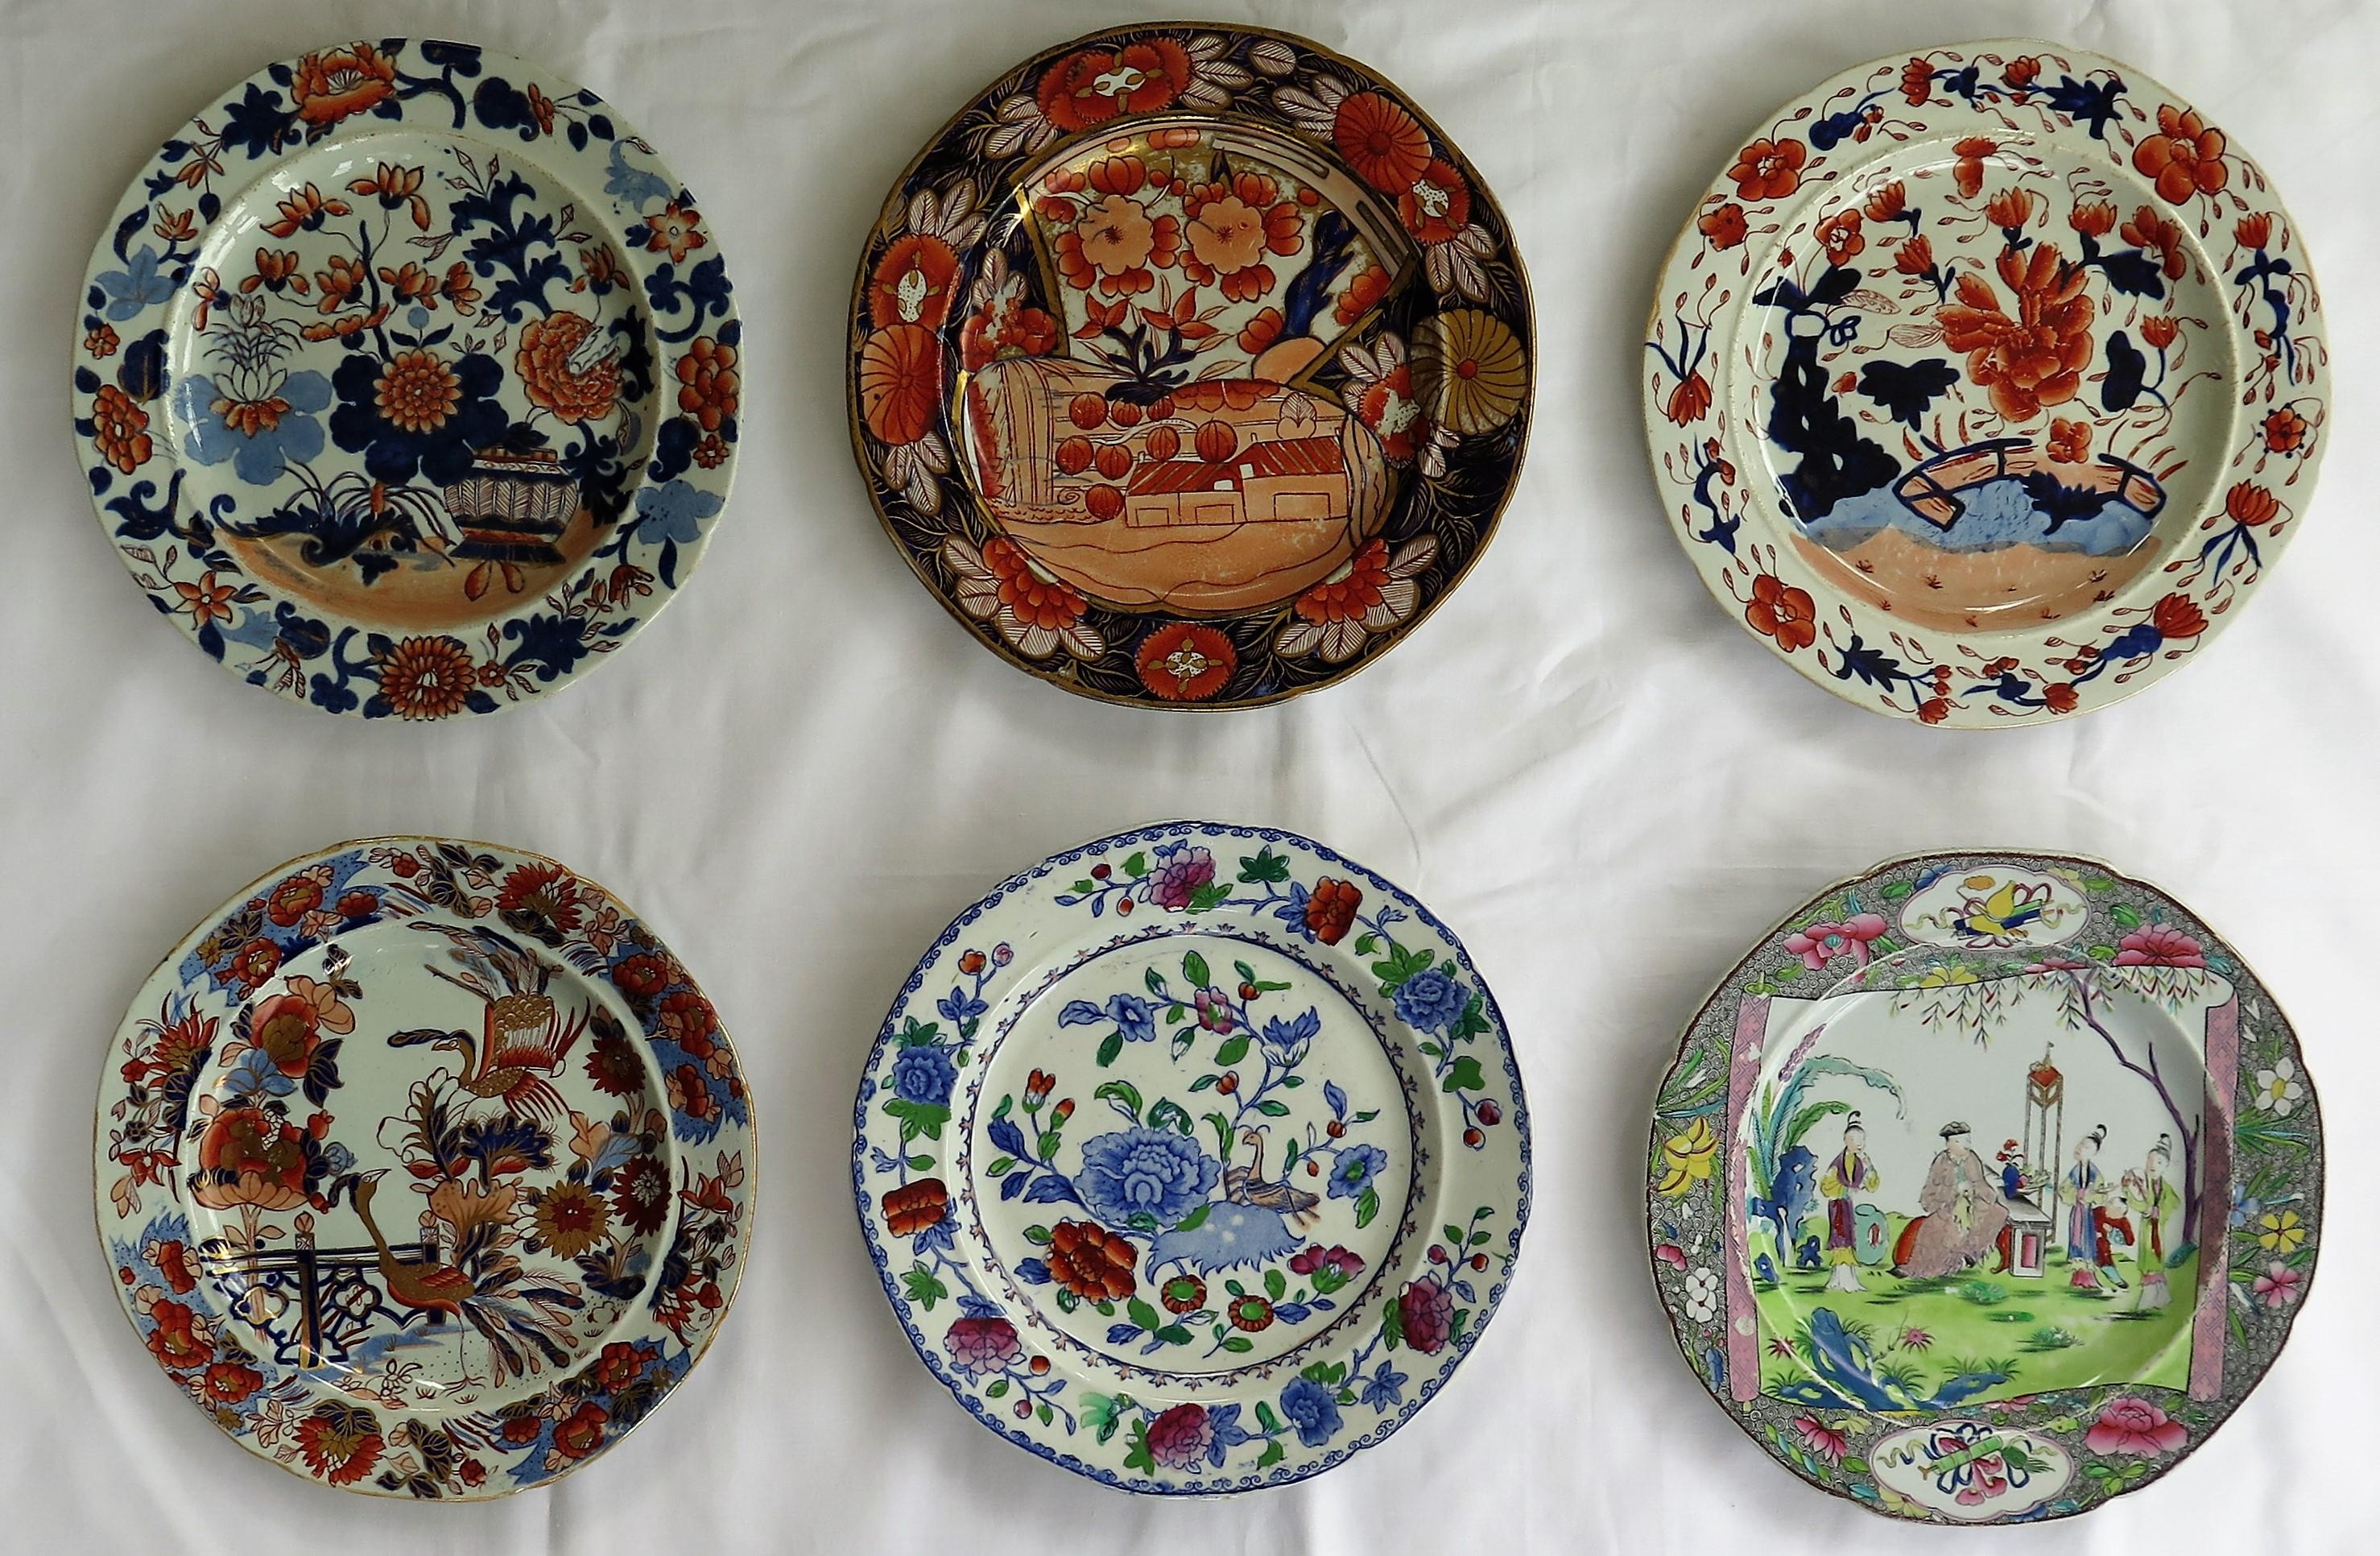 This is a harlequin set of Six Mason's Ironstone Dinner Plates, all dating to the earliest period between 1813 and 1820.

All the plates are circular with a notched rim and of the same nominal size of about 9.5 inches diameter, but have different